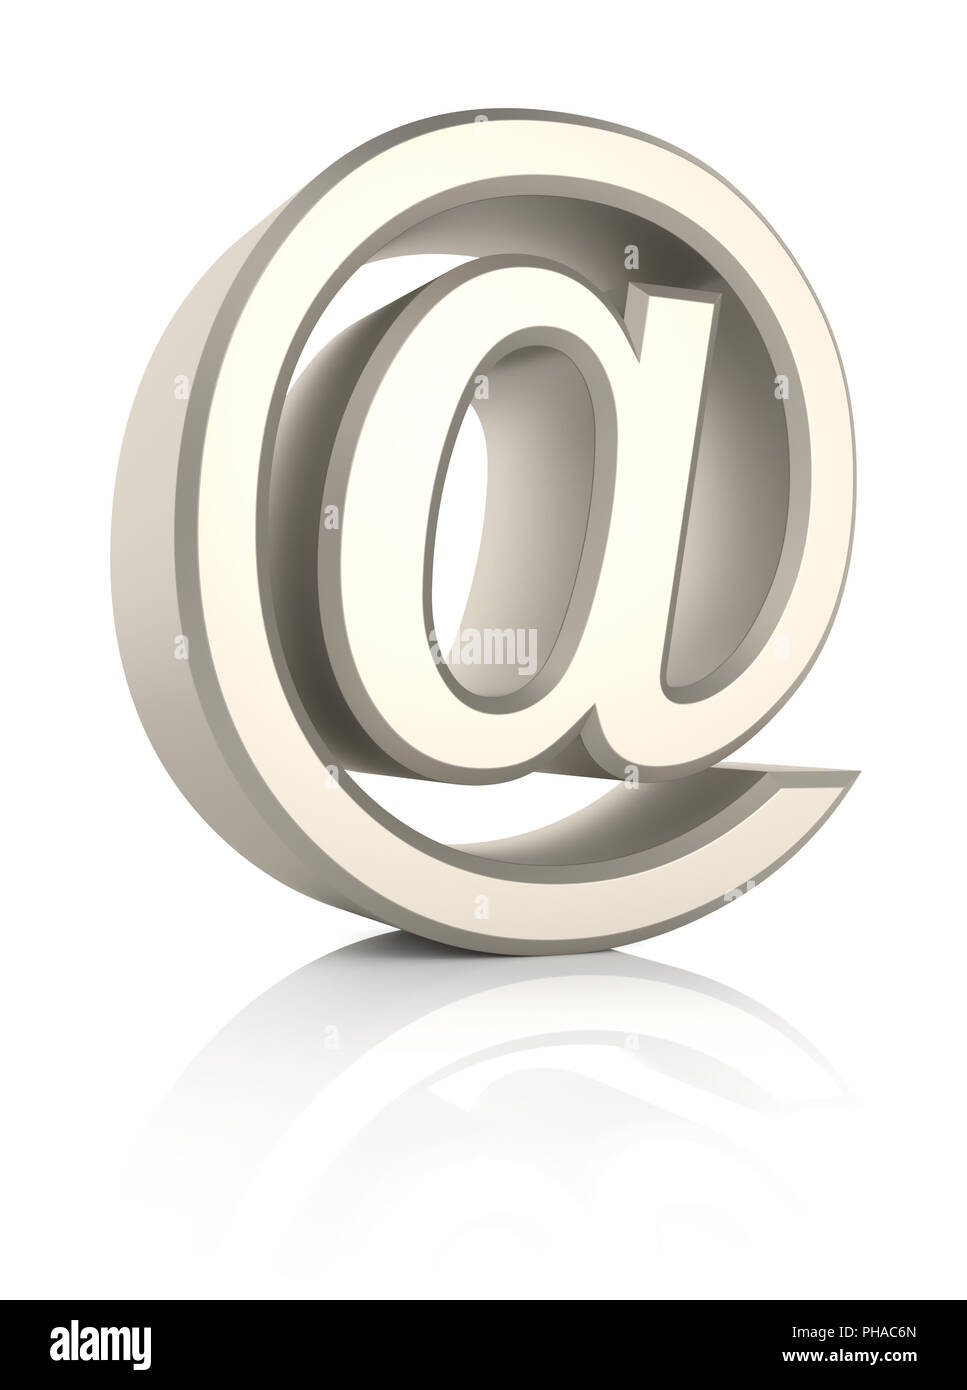 Email Sign Ioslated on White Background Stock Photo